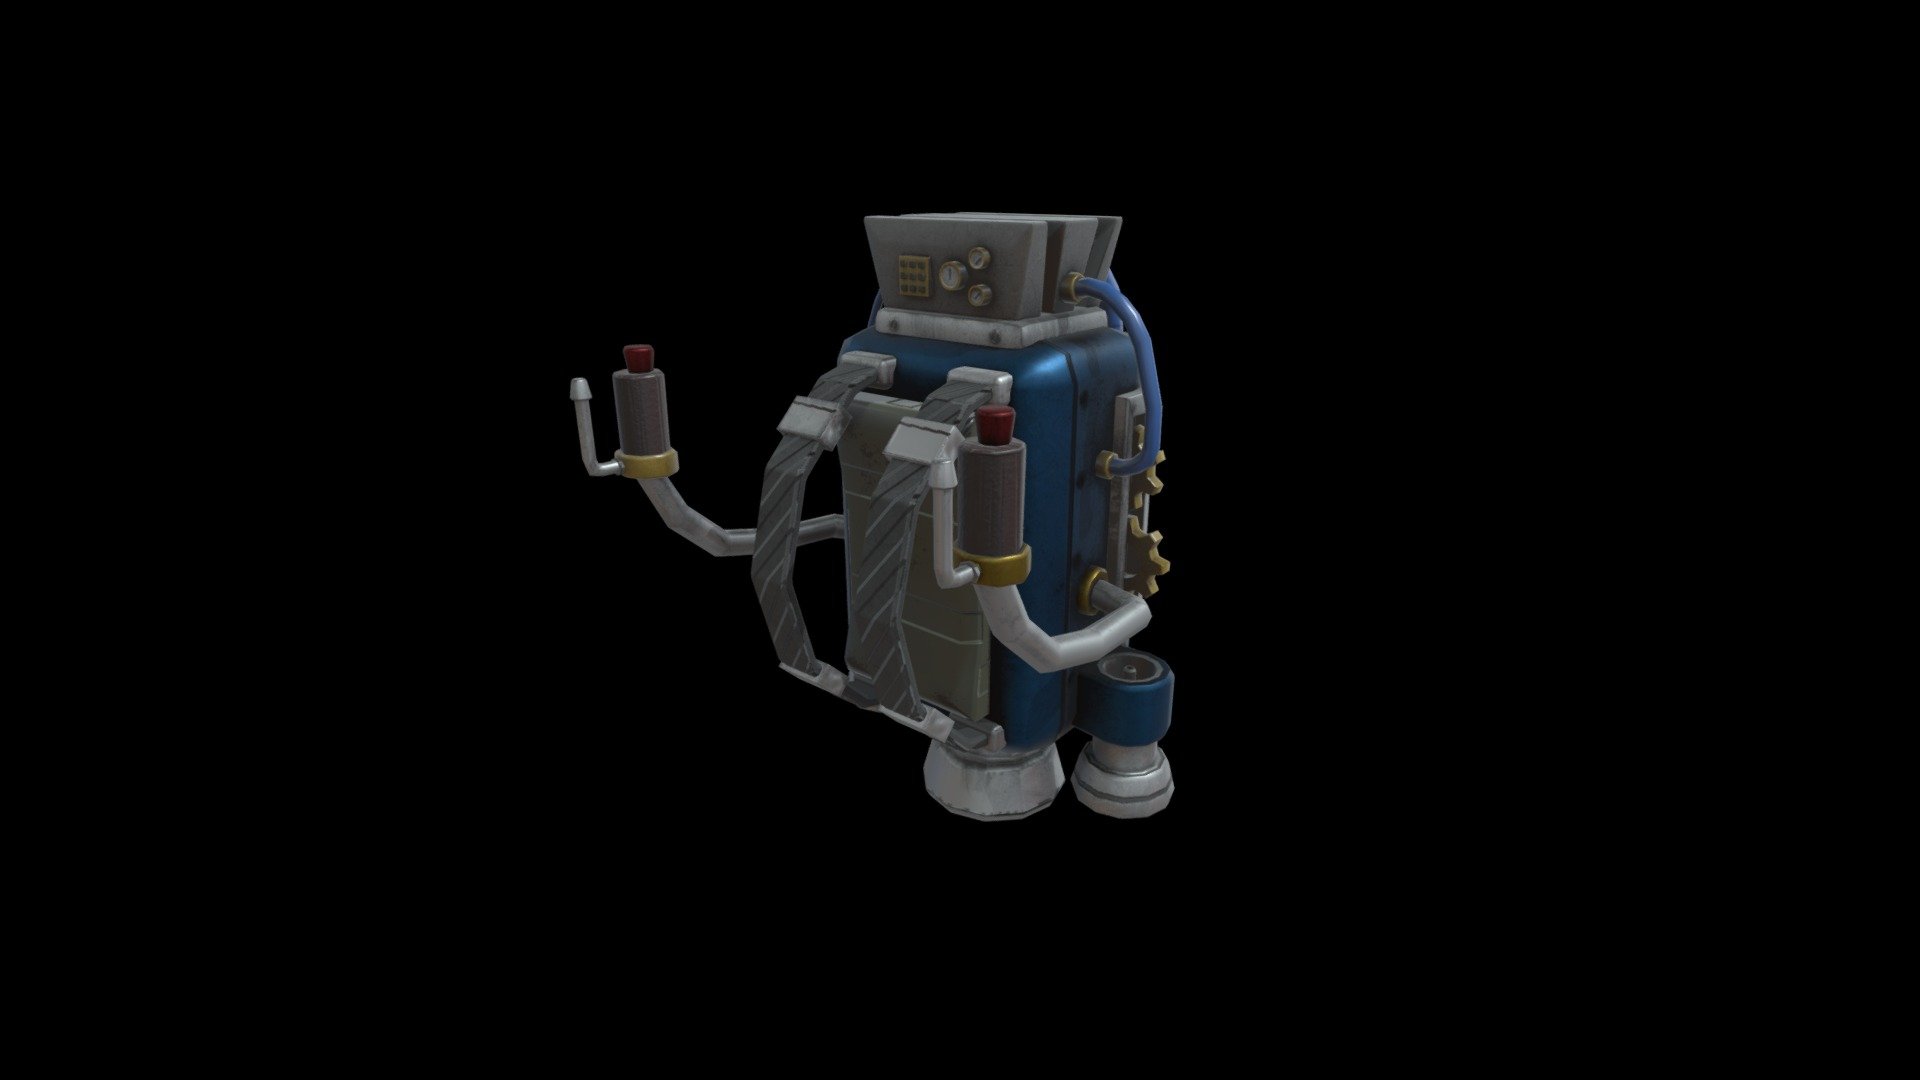 Jetpack with basic not practical engineering 3d model